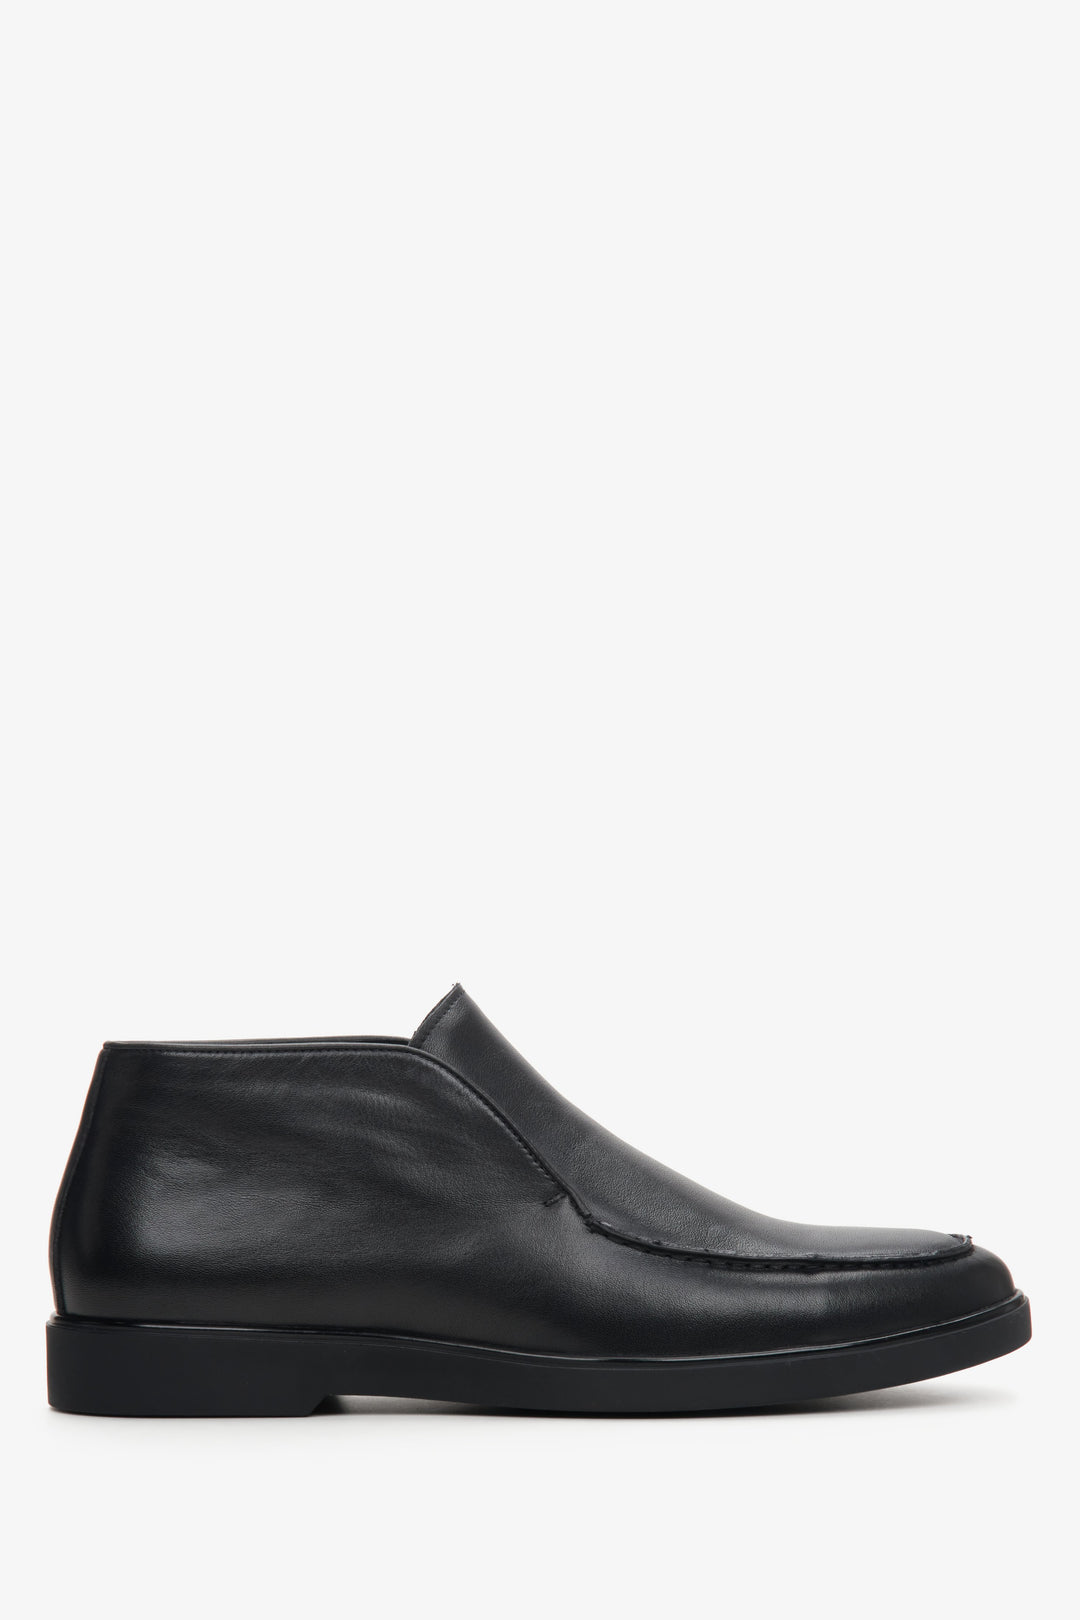 Men's black ankle boots made of genuine leather by Estro - shoe profile.